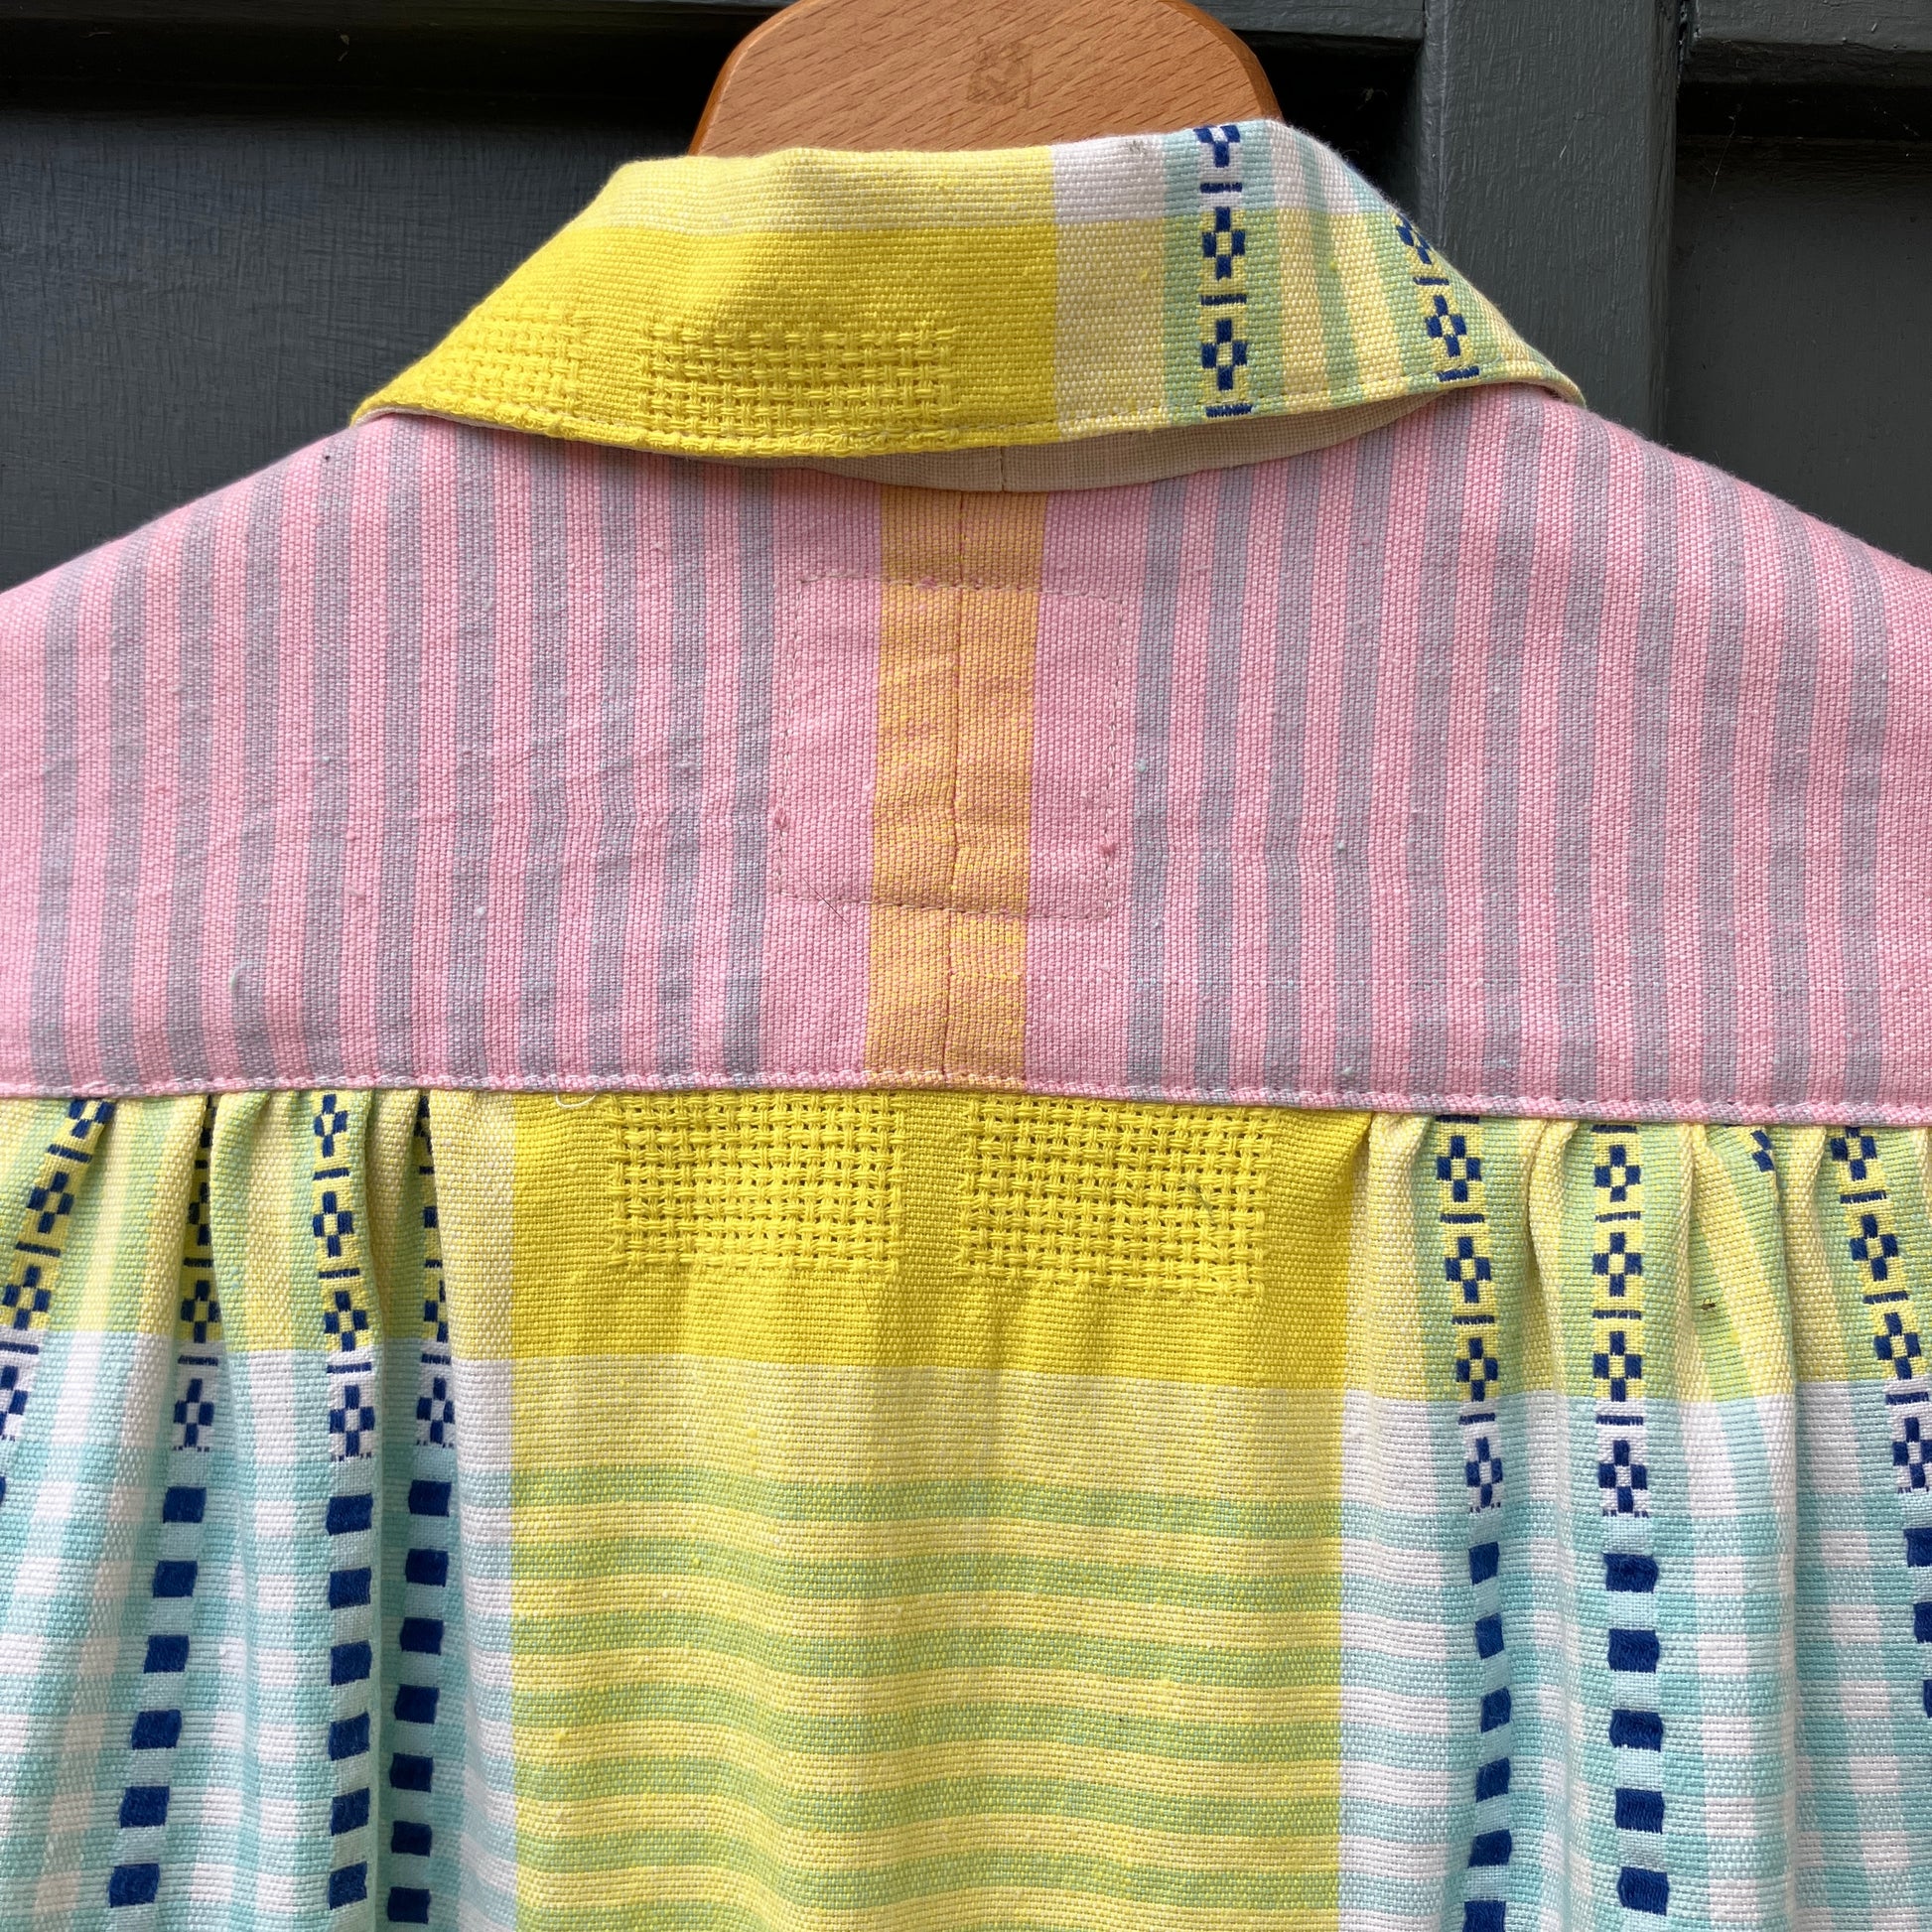 Shirt made from a reclaimed cotton tablecloth in shades of pink, blue, peach and bright yellow